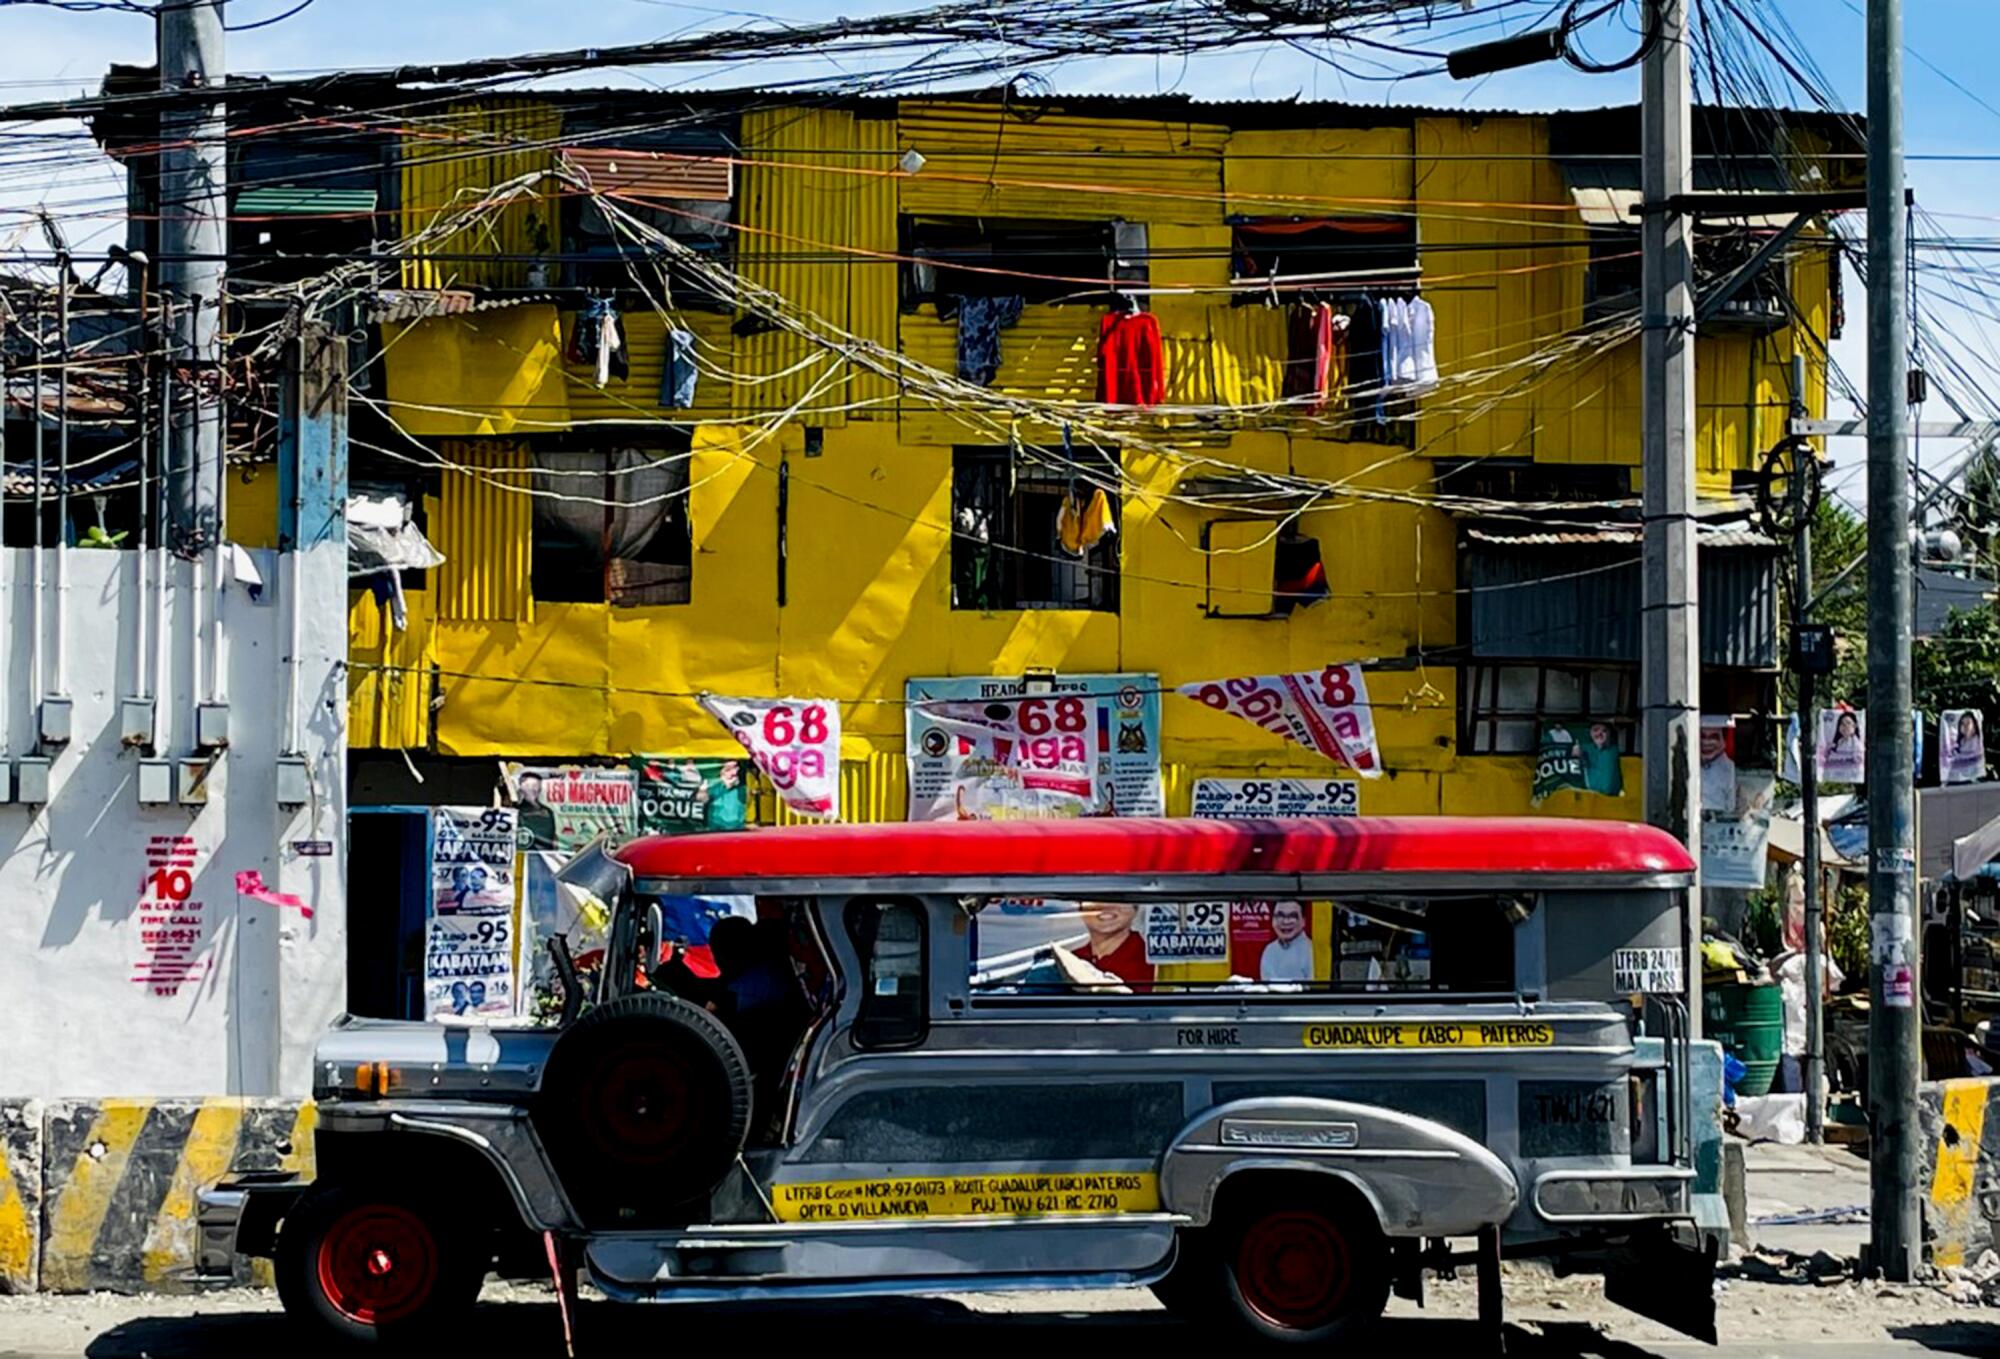 A jeepney in front of a yellow building.